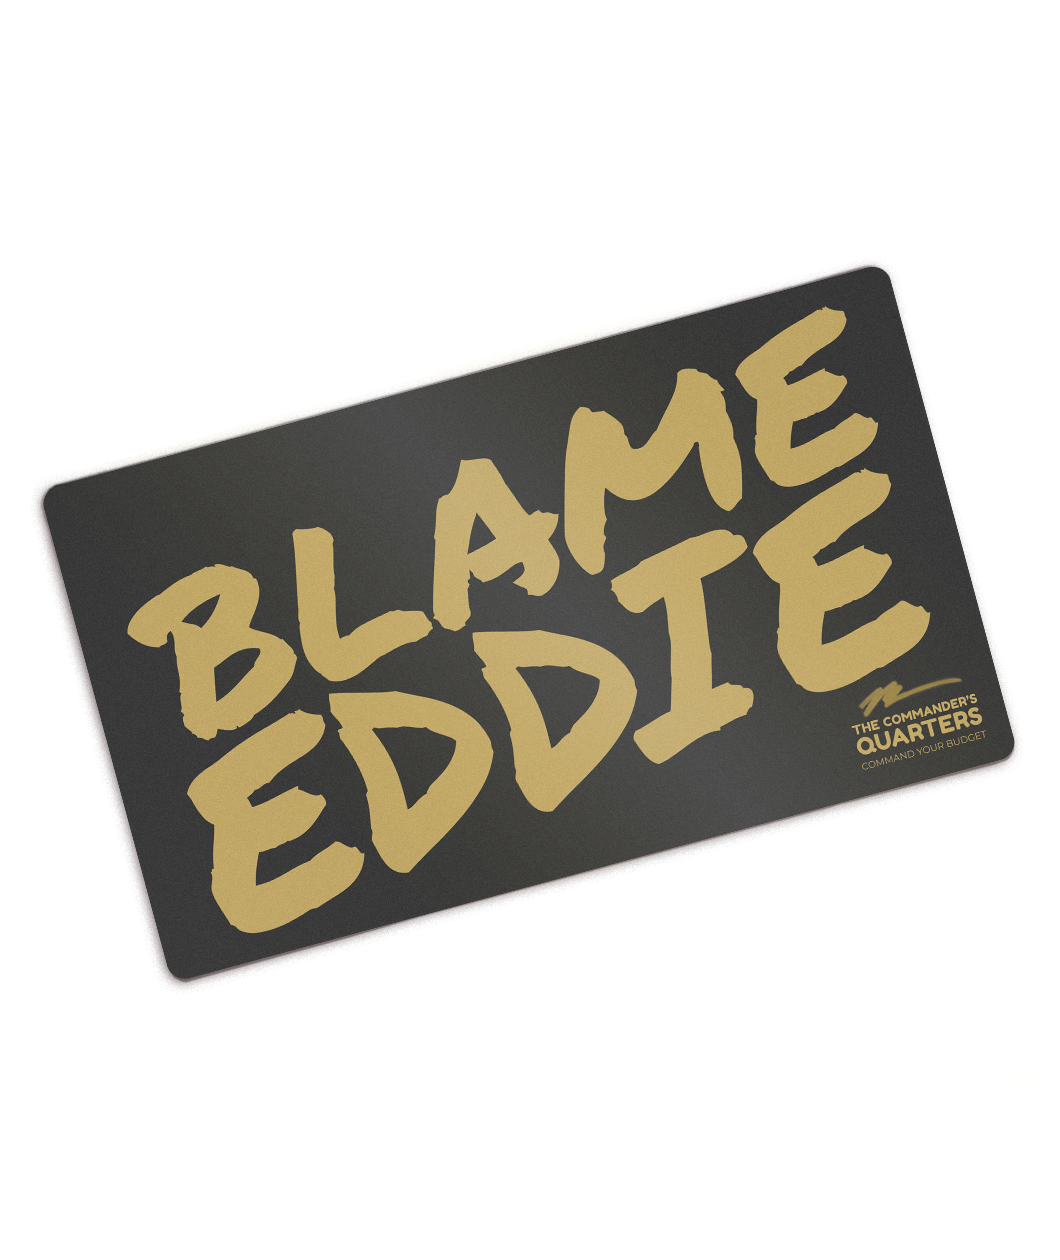 Black rectangular playmat with curved corners. “Blame Eddie” is in gold font resembling handwriting. “The commander’s quarters” is in the bottom right corner in gold sans serif font with a gold signature above it - from The Commander’s Quarters